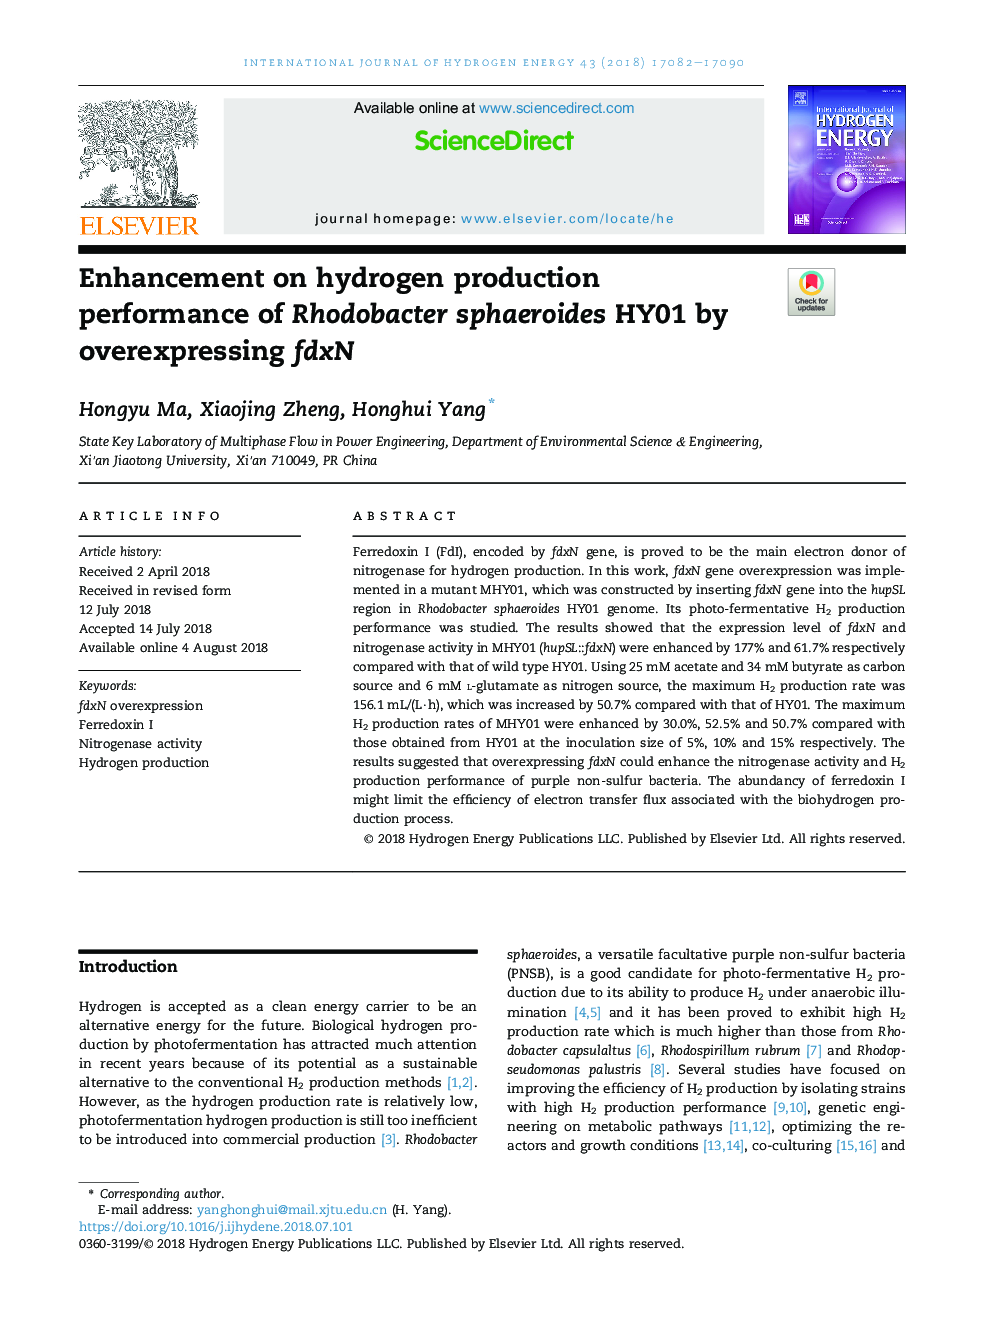 Enhancement on hydrogen production performance of Rhodobacter sphaeroides HY01 by overexpressing fdxN